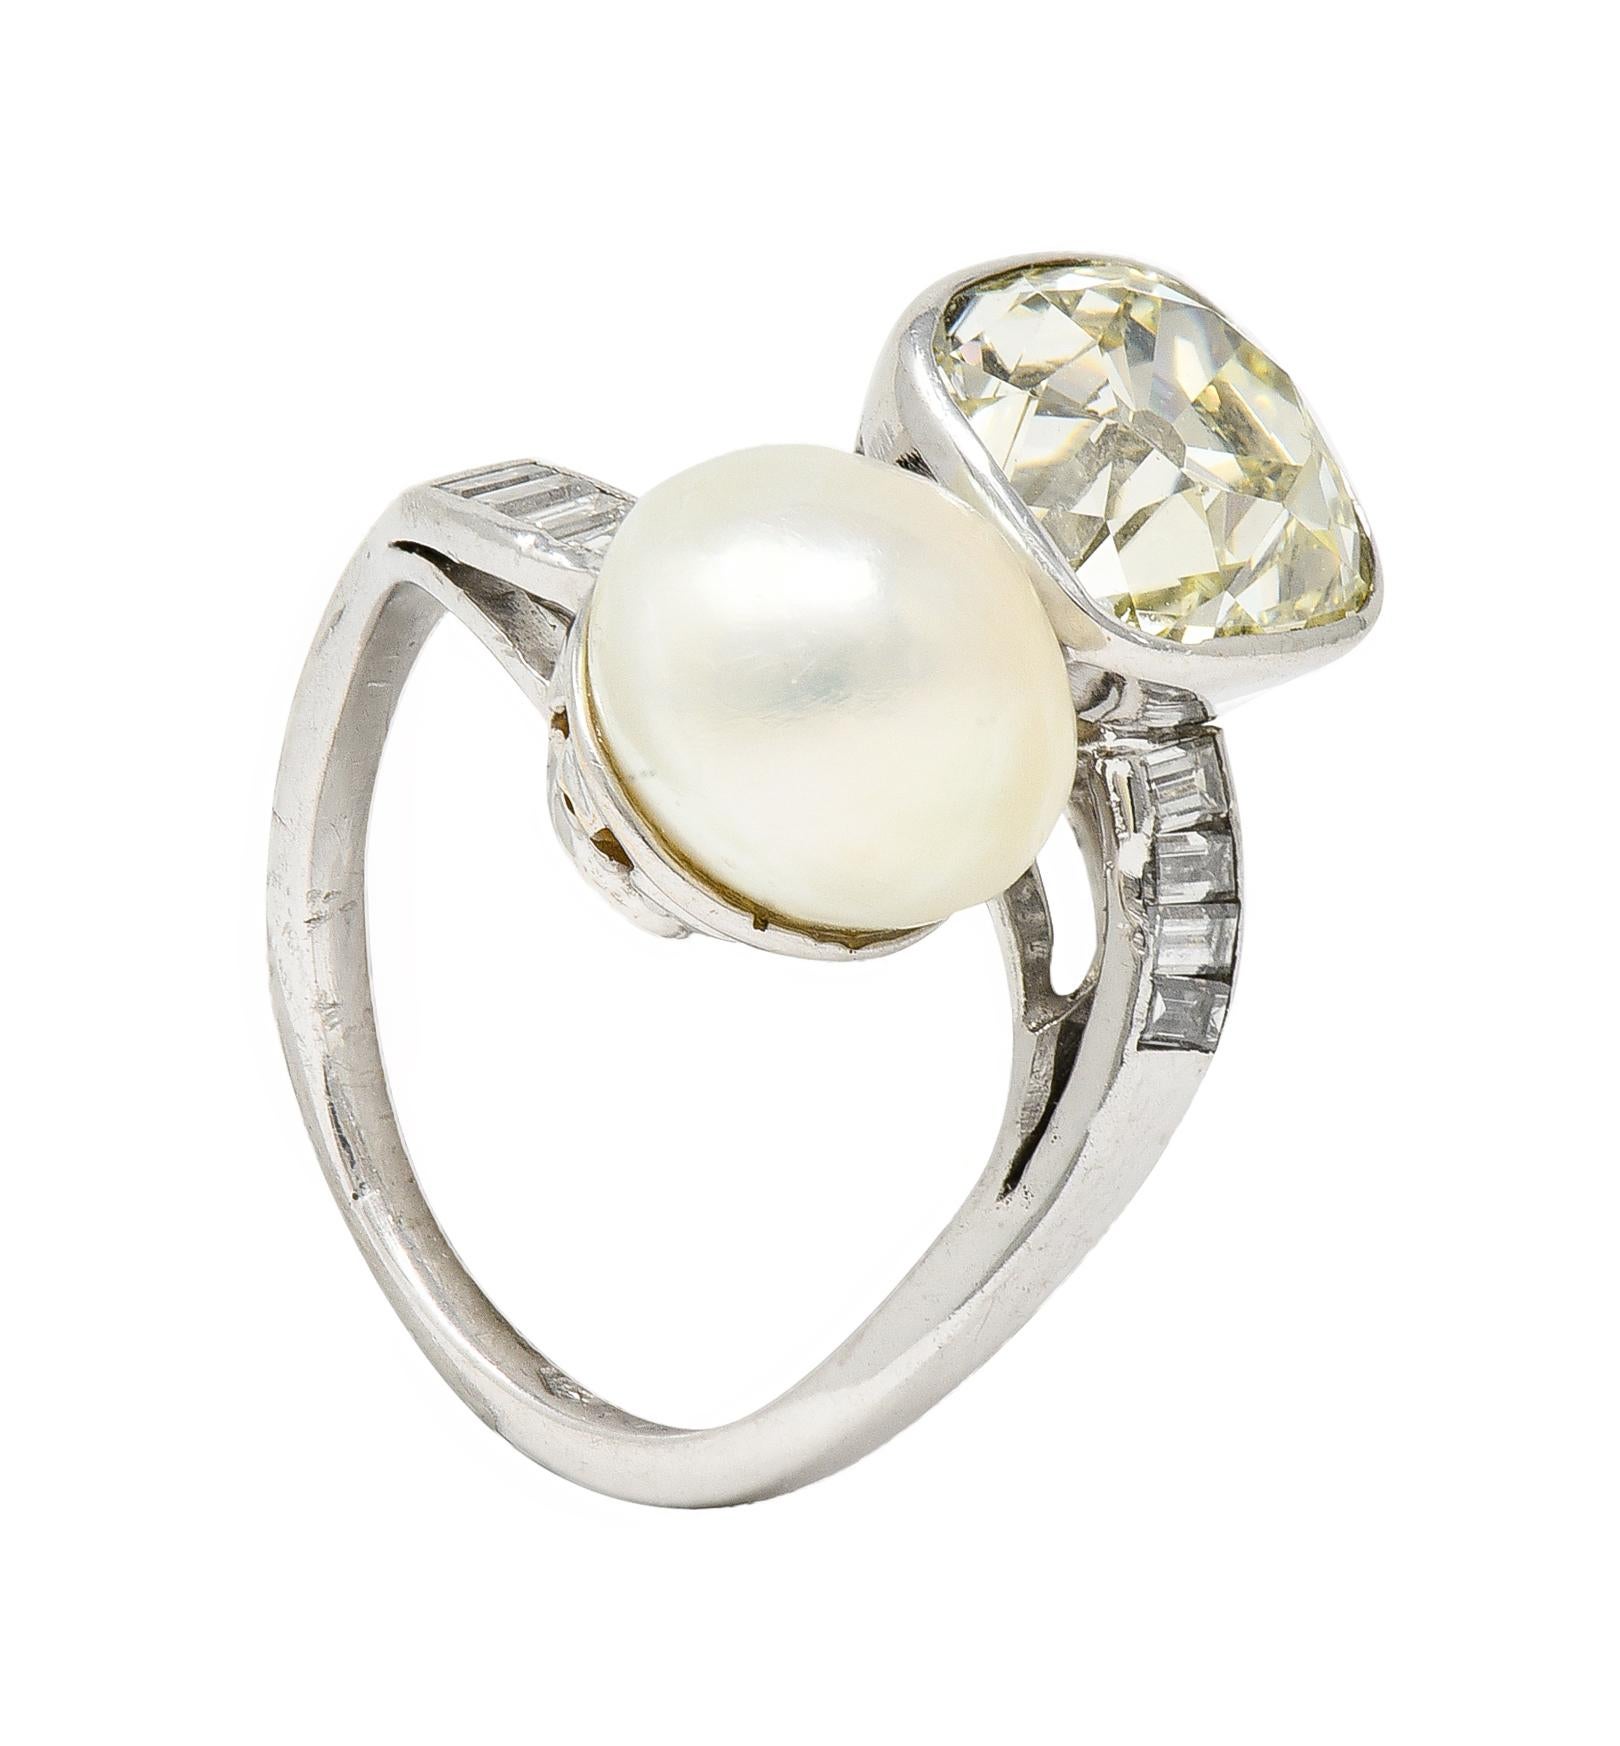 Bypass style ring terminates with a pearl and an old mine cut diamond - both with pierced baskets 
Pearl is button shaped and Natural Saltwater Pinctada
White in body color with strong iridescence
Diamond weighs approximately 3.20 carats 
U/V color